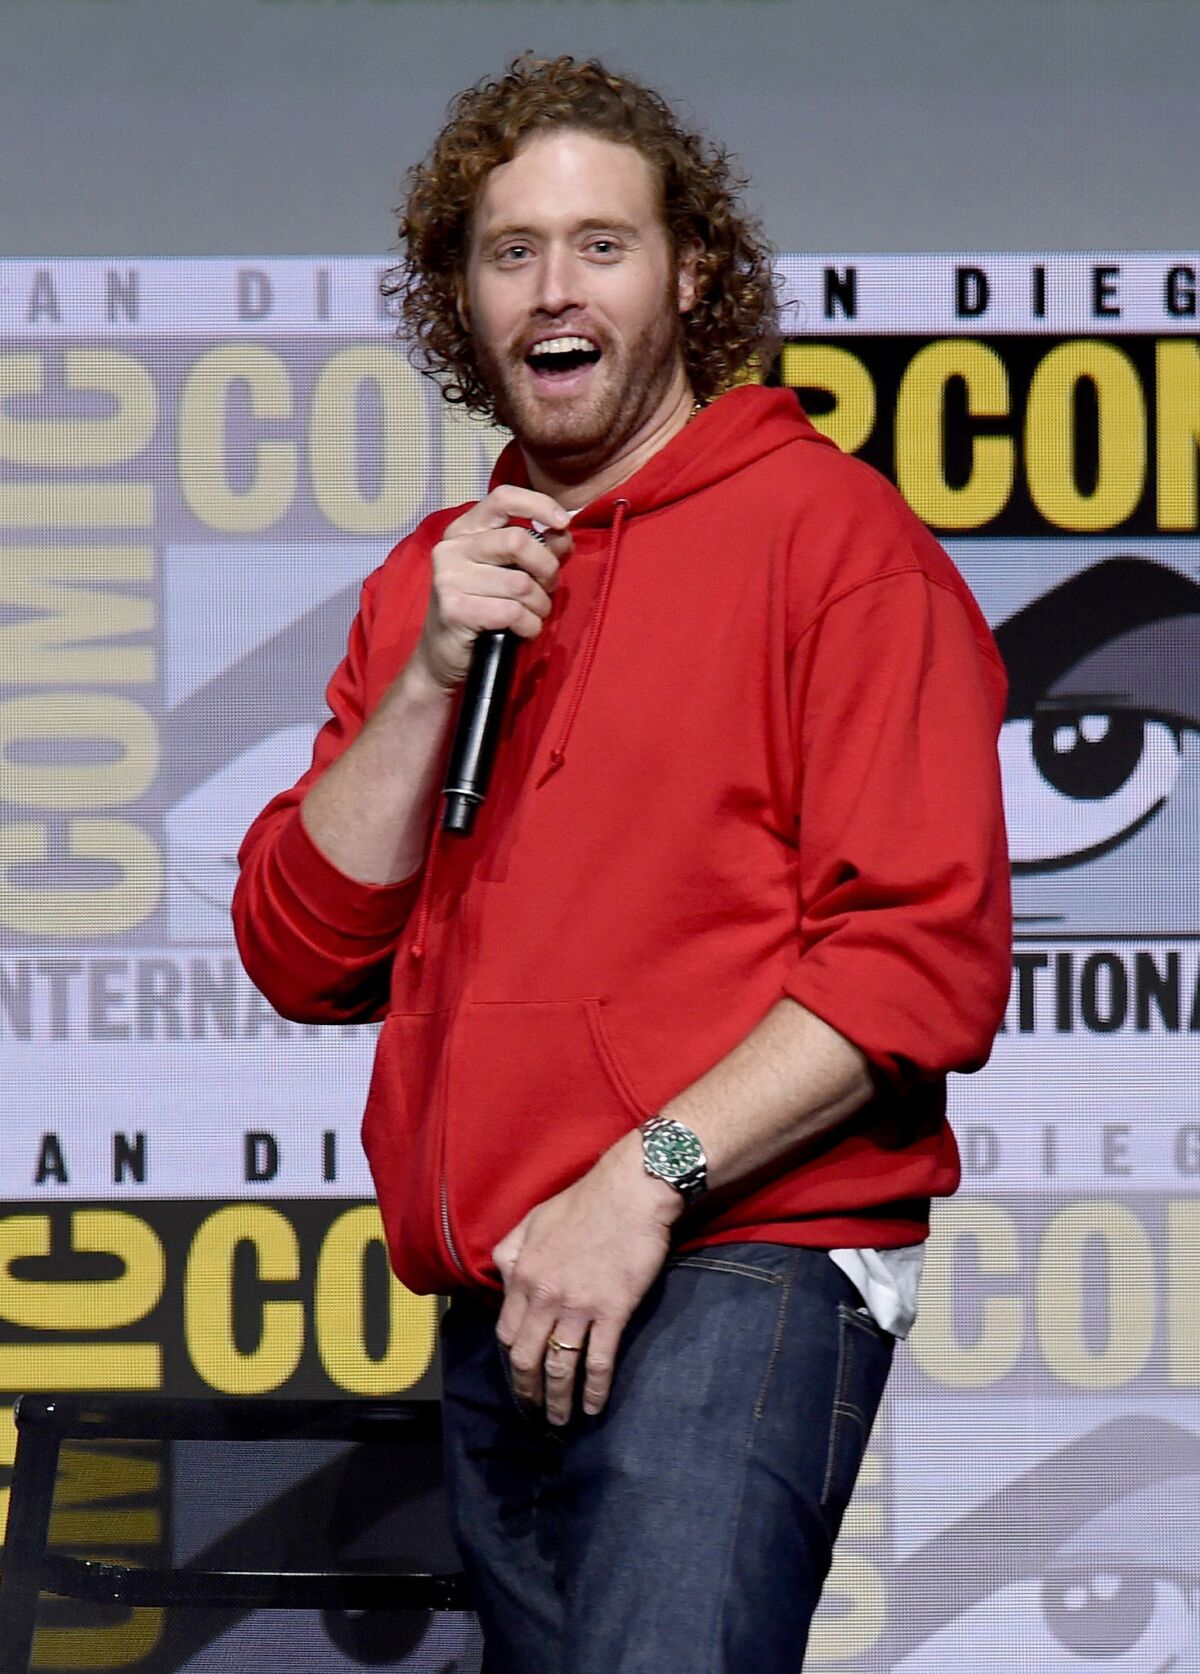 Actor and Comedian, T.J. Miller at San Diego Comic-Con International.